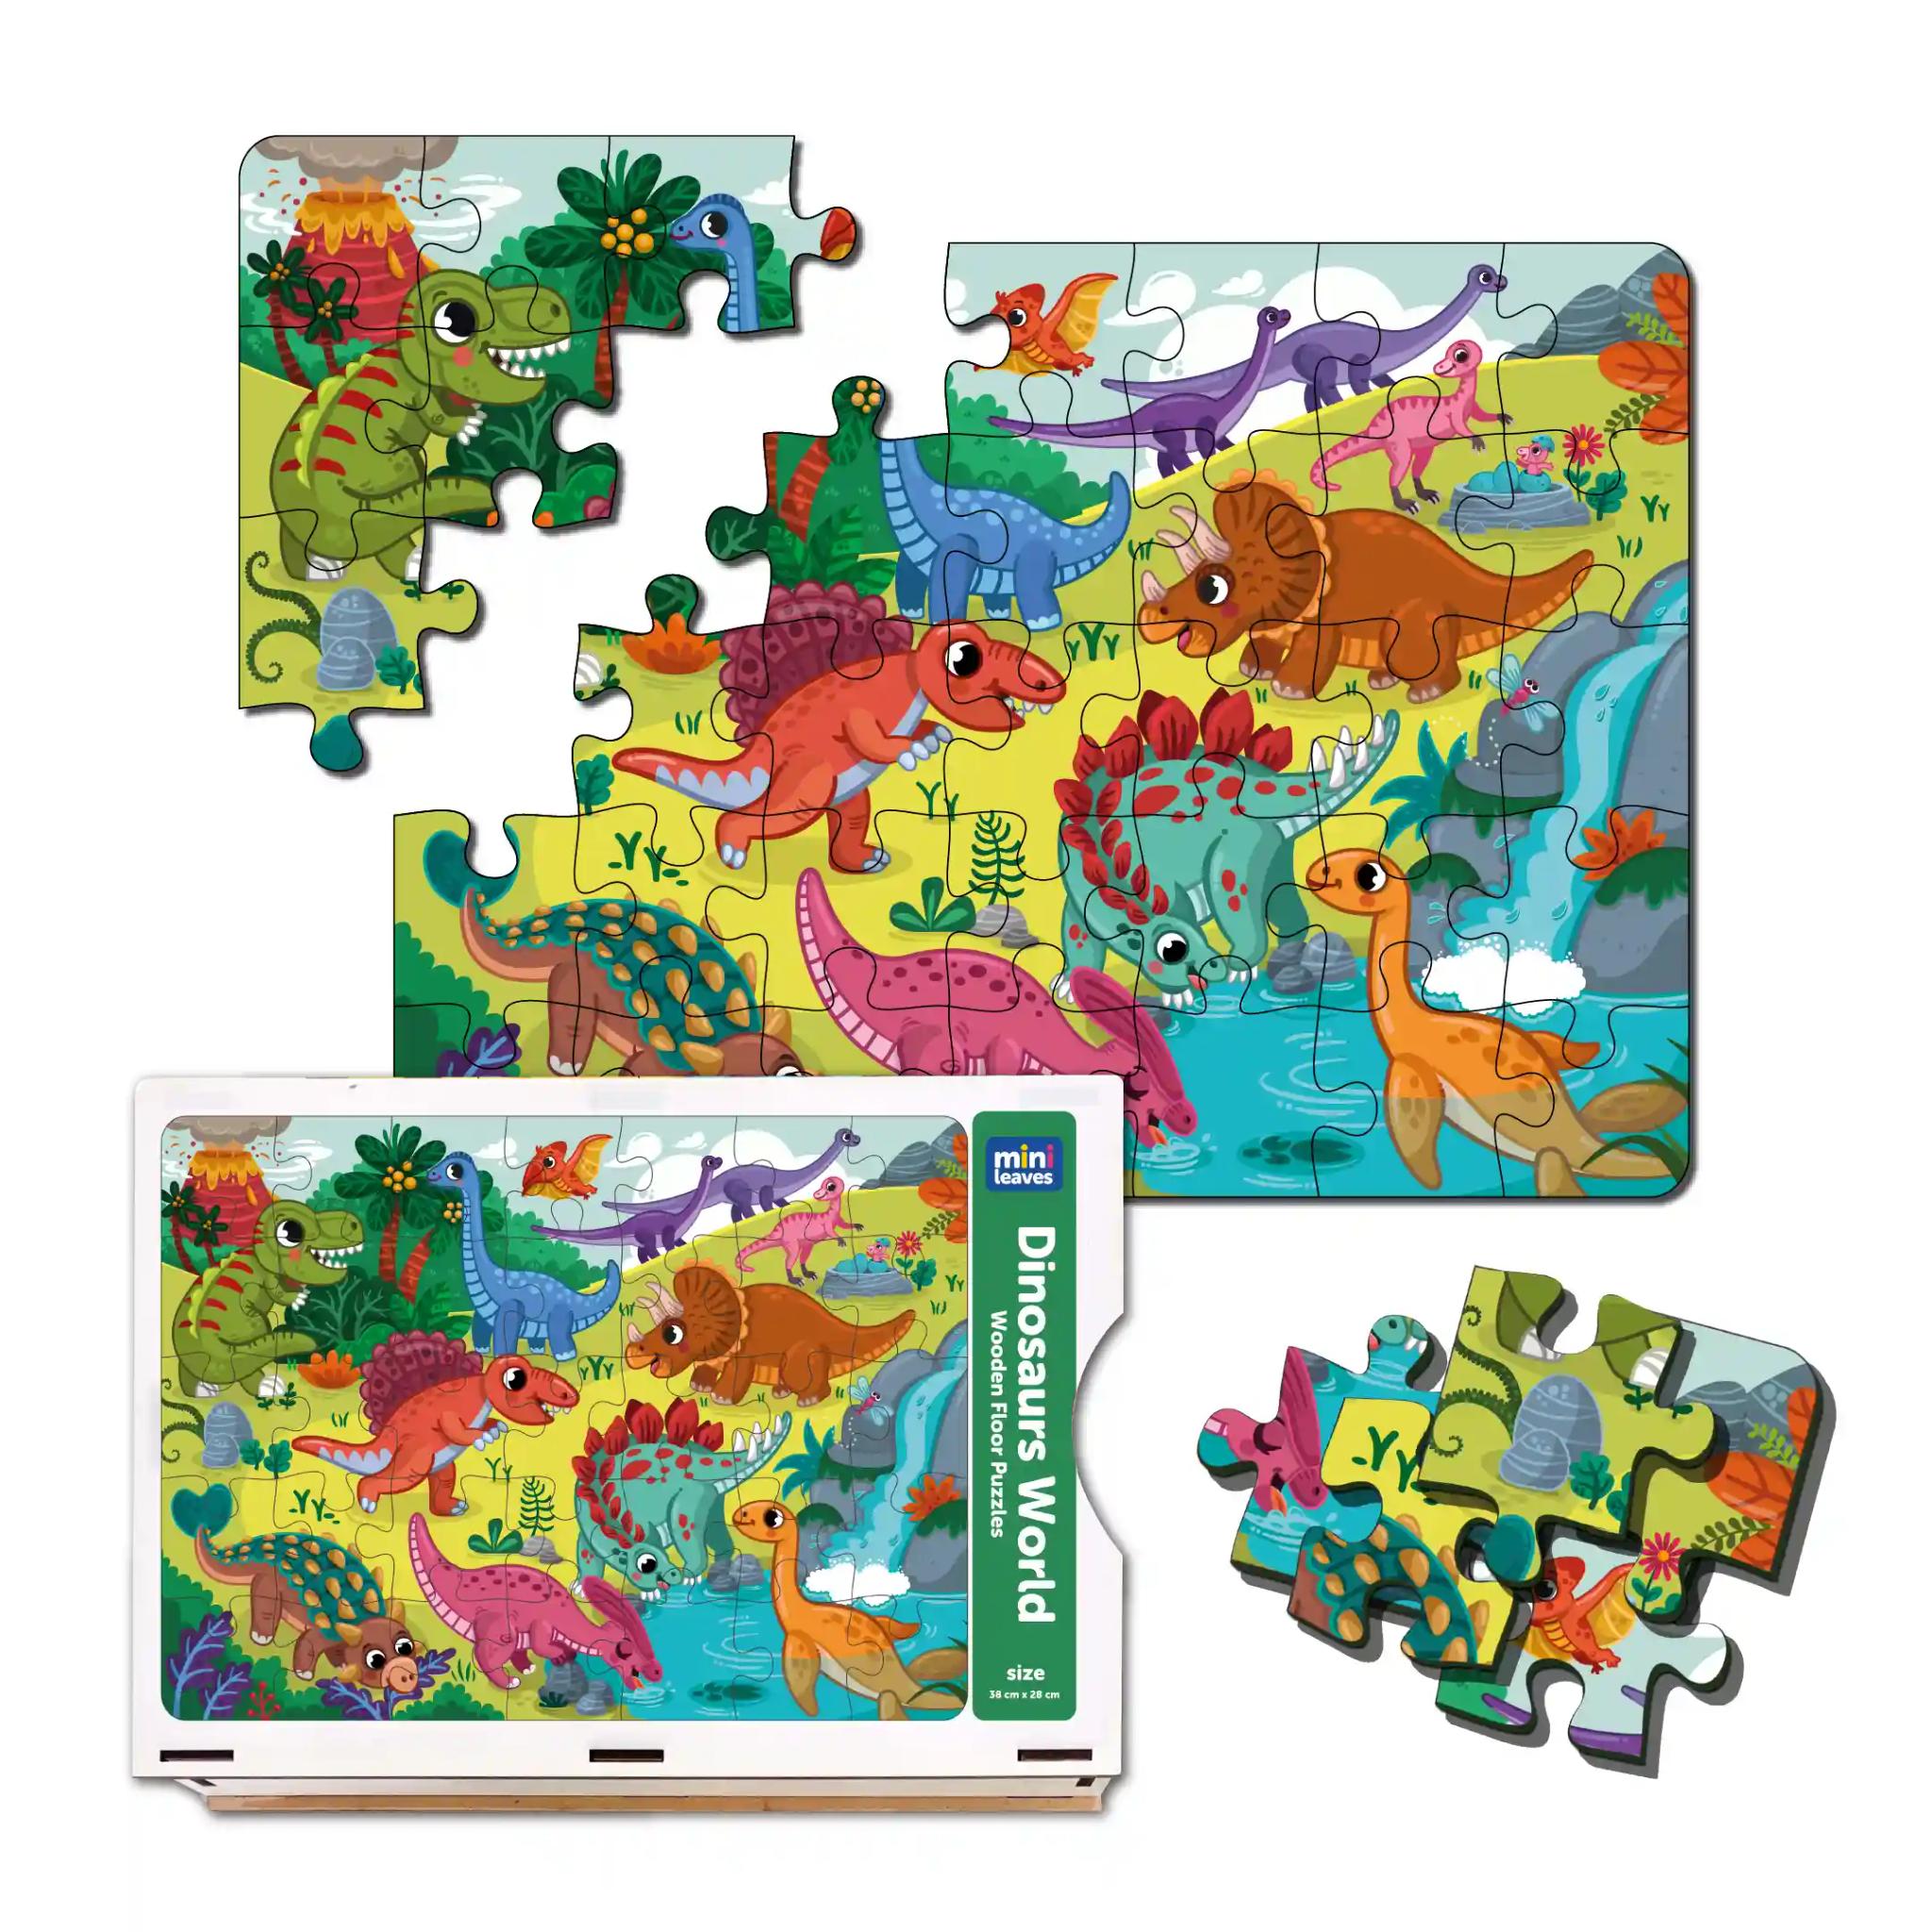 Mini Leaves  Dinosaurs World 48 Piece Wooden Floor Puzzle for Kids with Booster Cards & Wooden Box